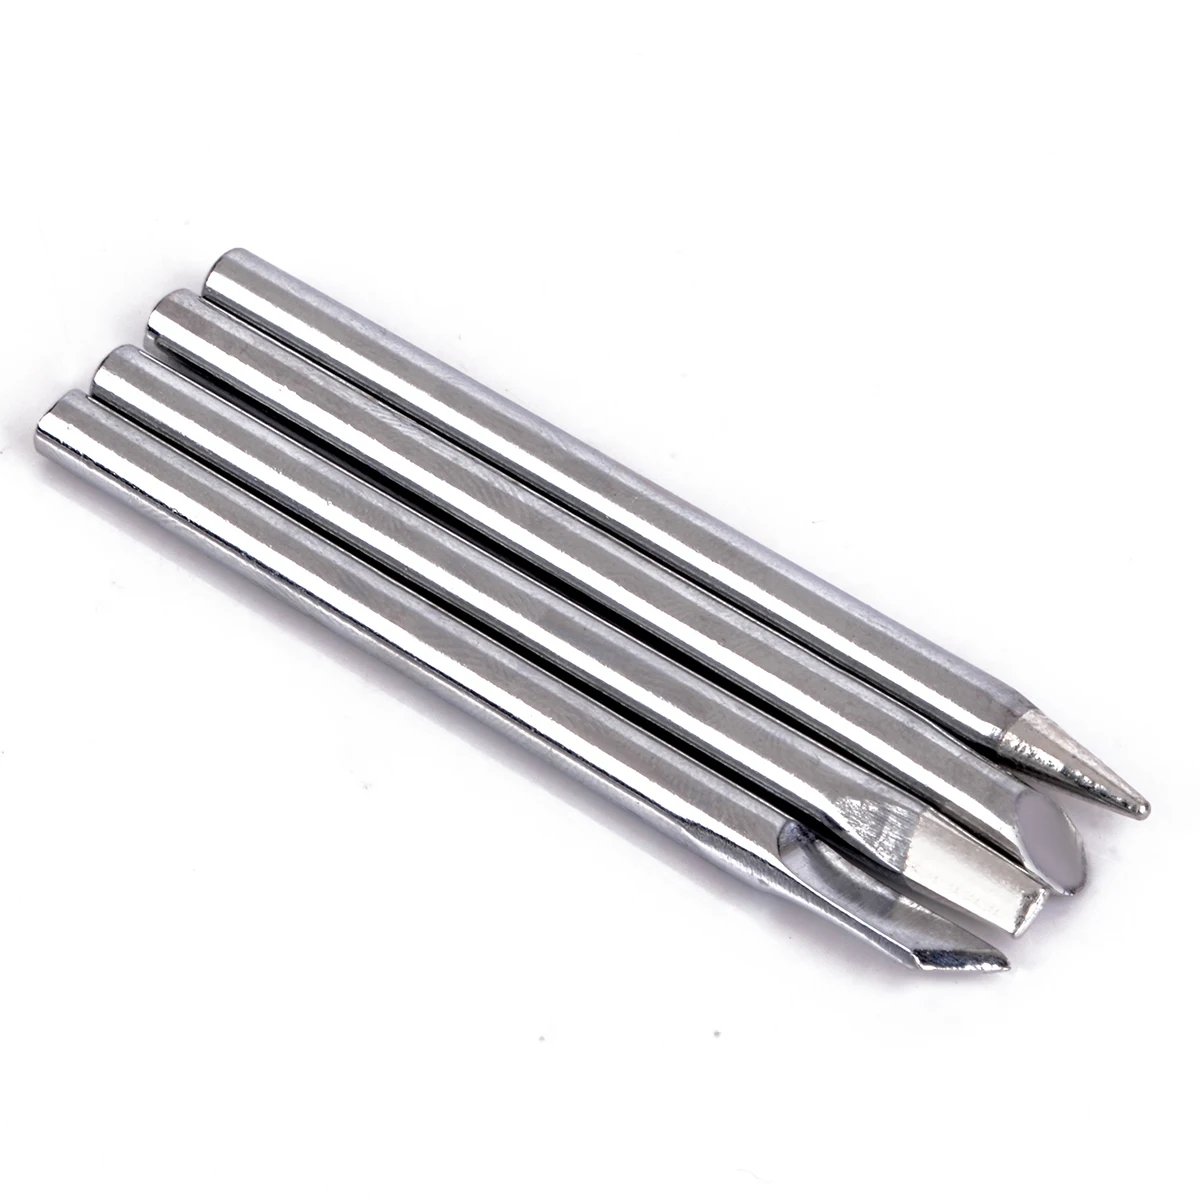 

4pcs Replaceable Soldering Iron Tips Head 4.4mm Diameter 65mm Length For 40W Solder Irons